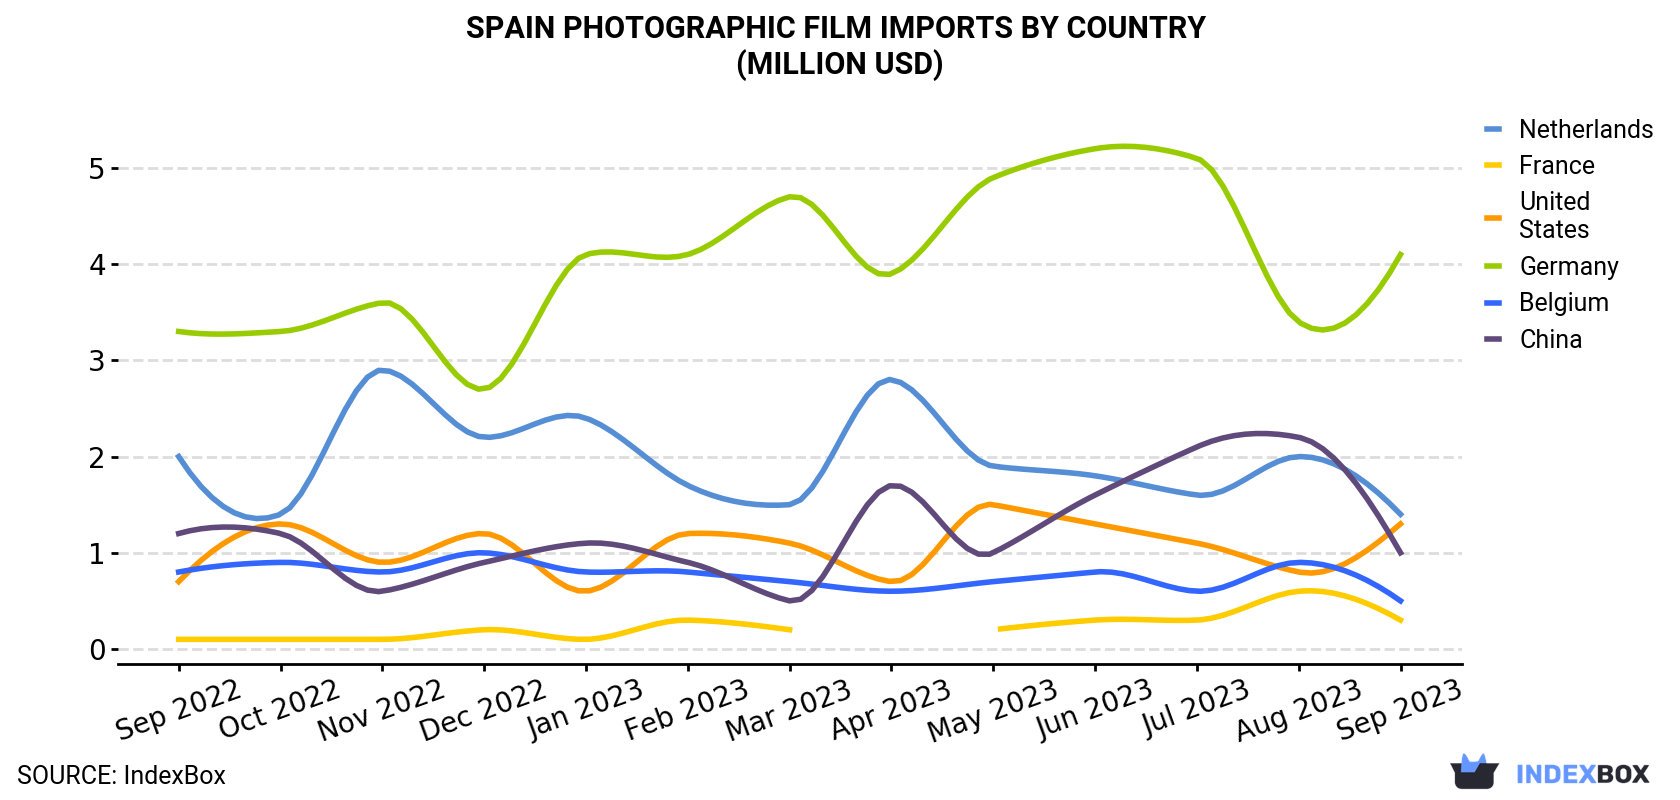 Spain Photographic Film Imports By Country (Million USD)